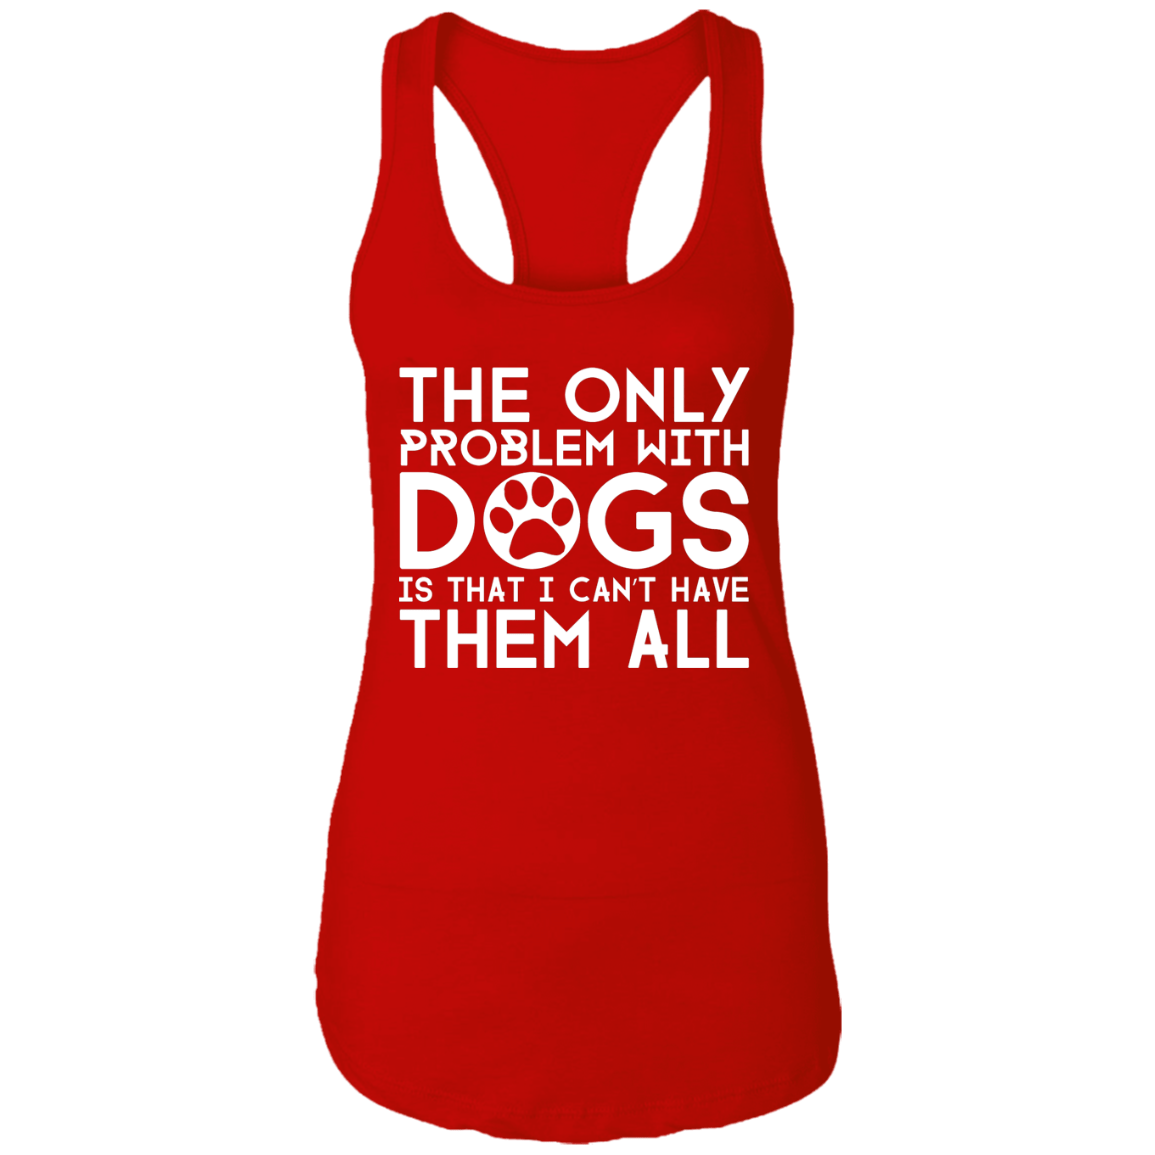 The Only Problem With Dogs - Ladies Racer Back Tank.